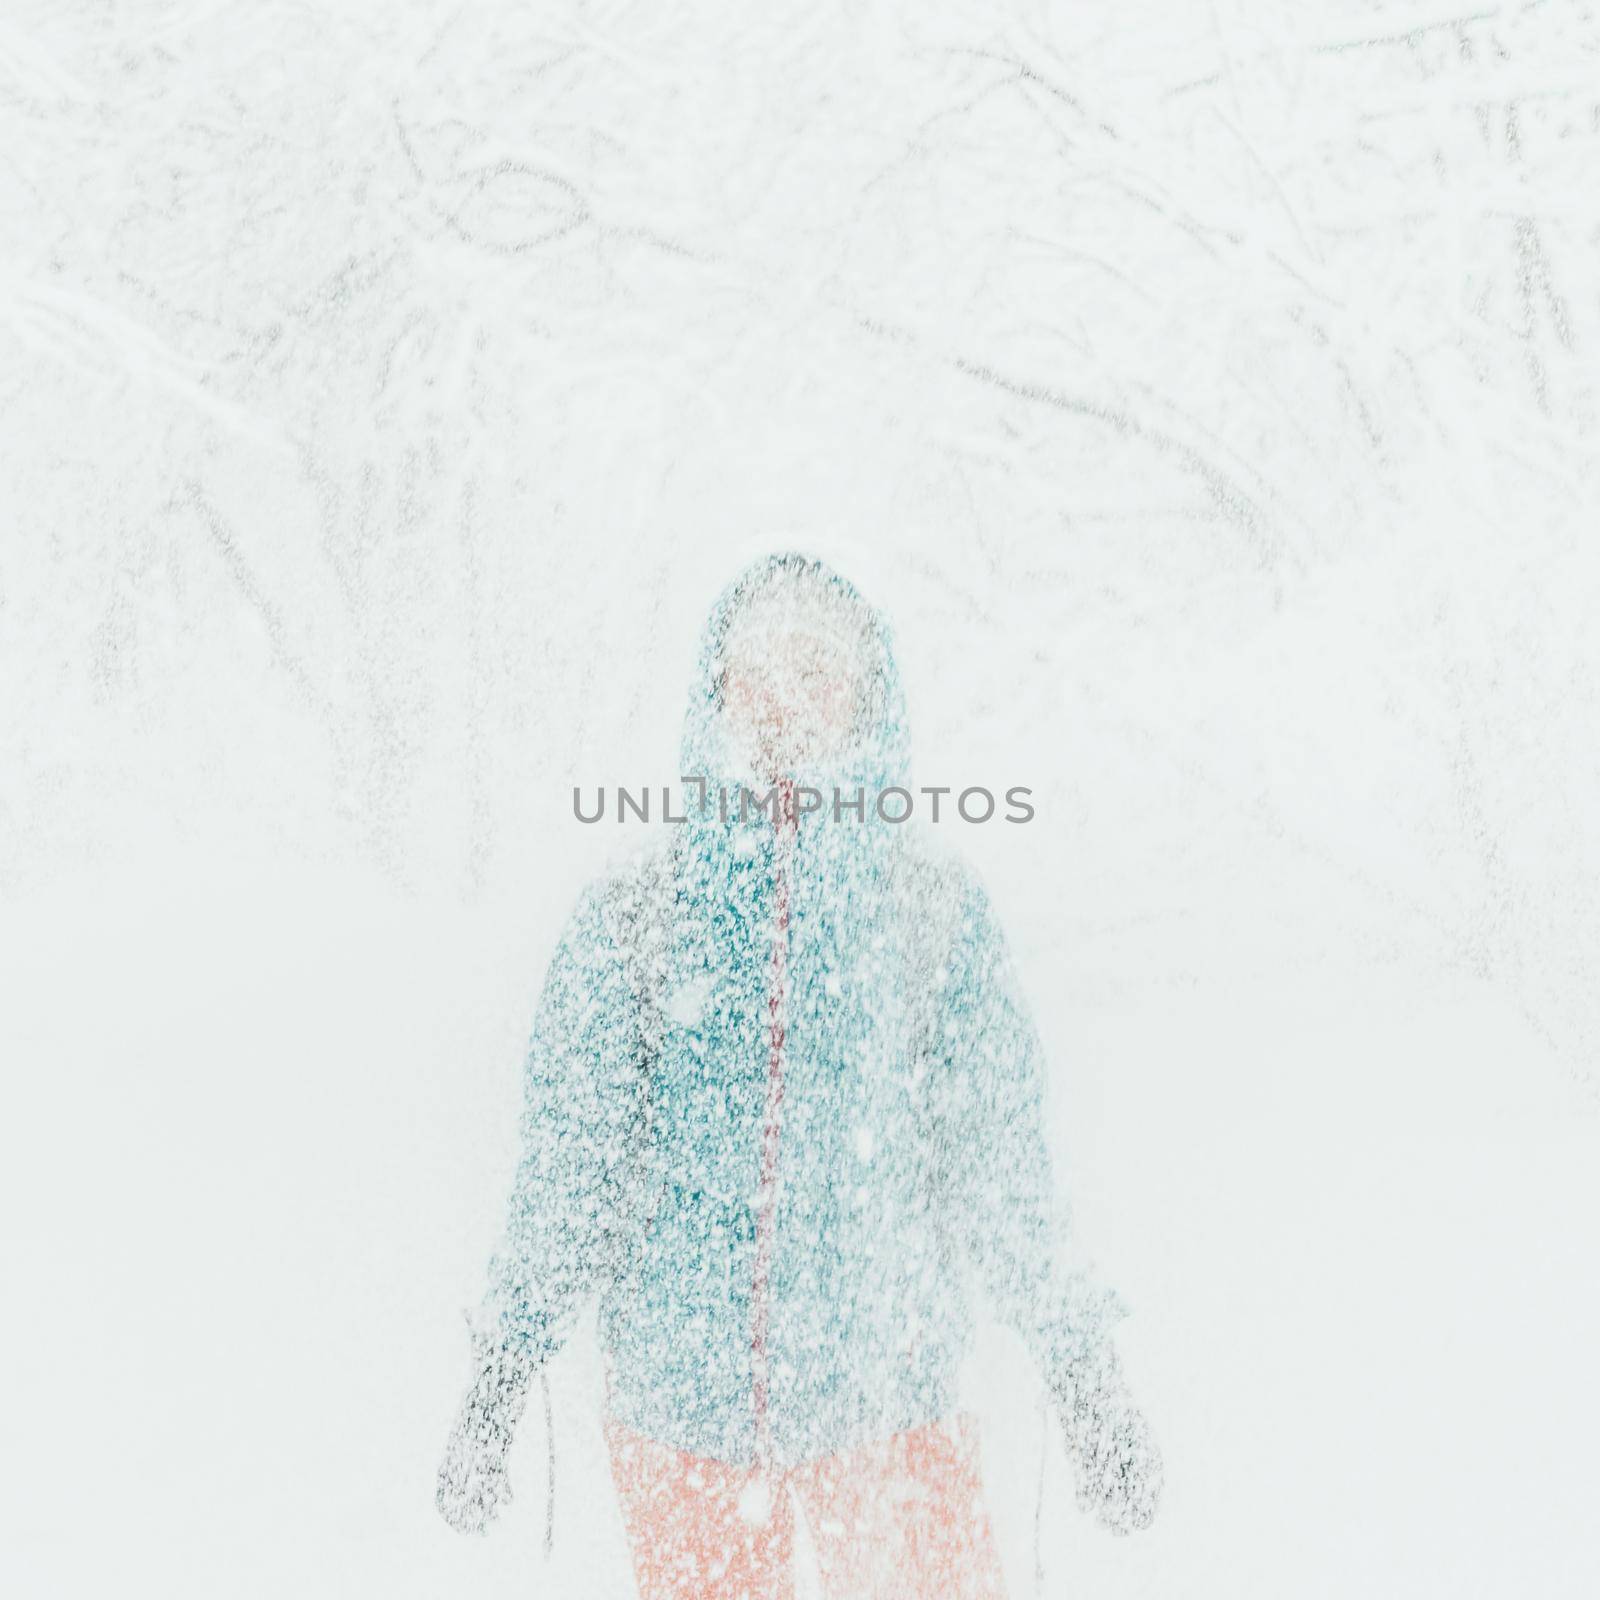 Young woman standing under falling snow in winter outdoor